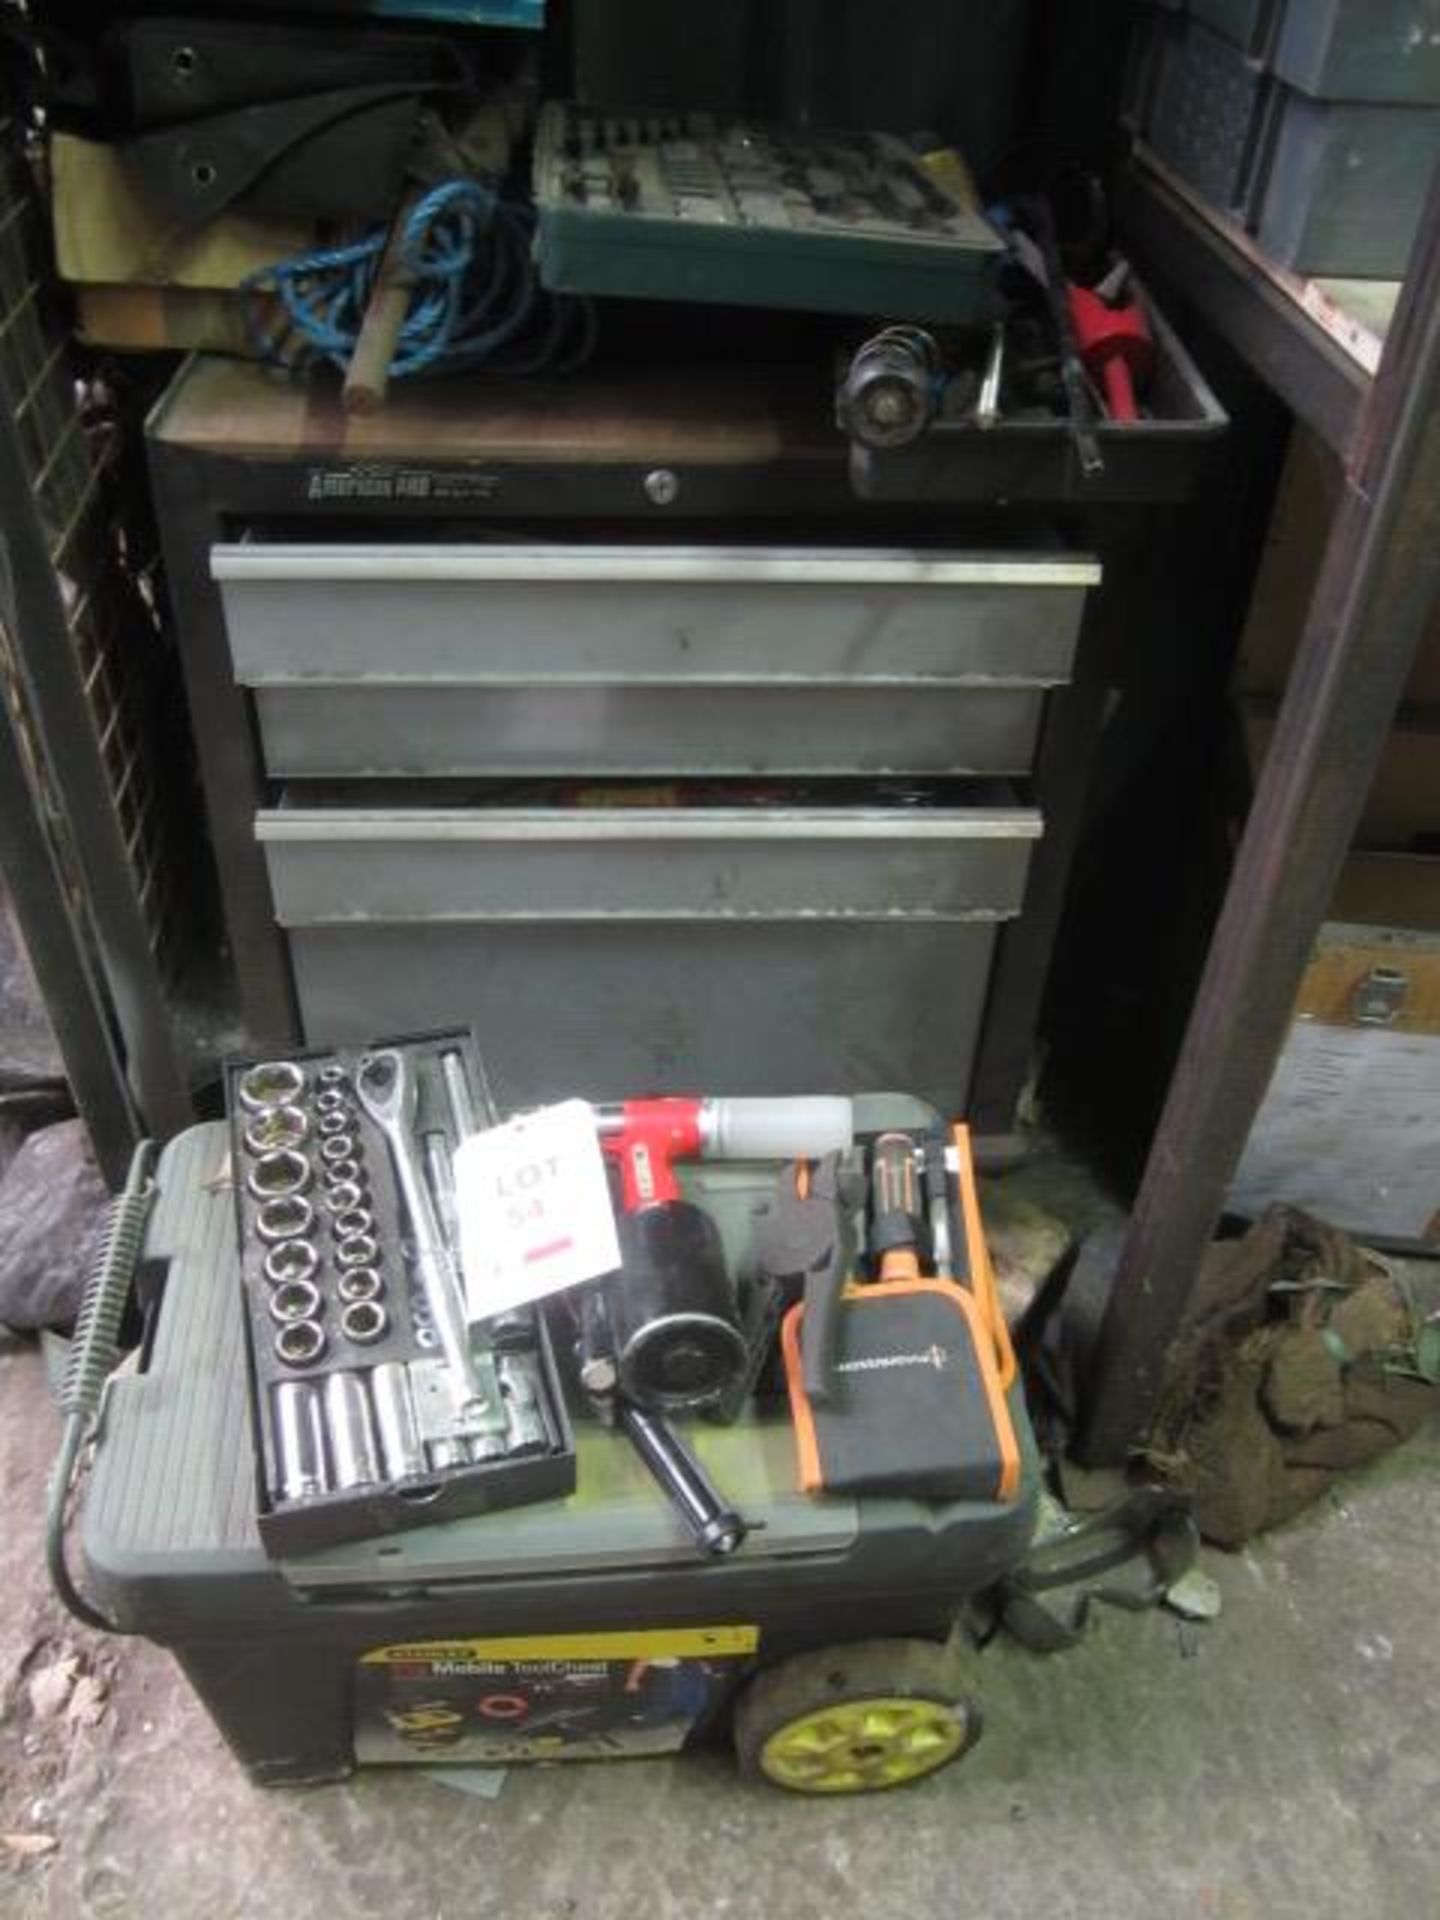 American Pro 4 drawer tool cabinets with contents of assorted hantools, drill bits, chisels,